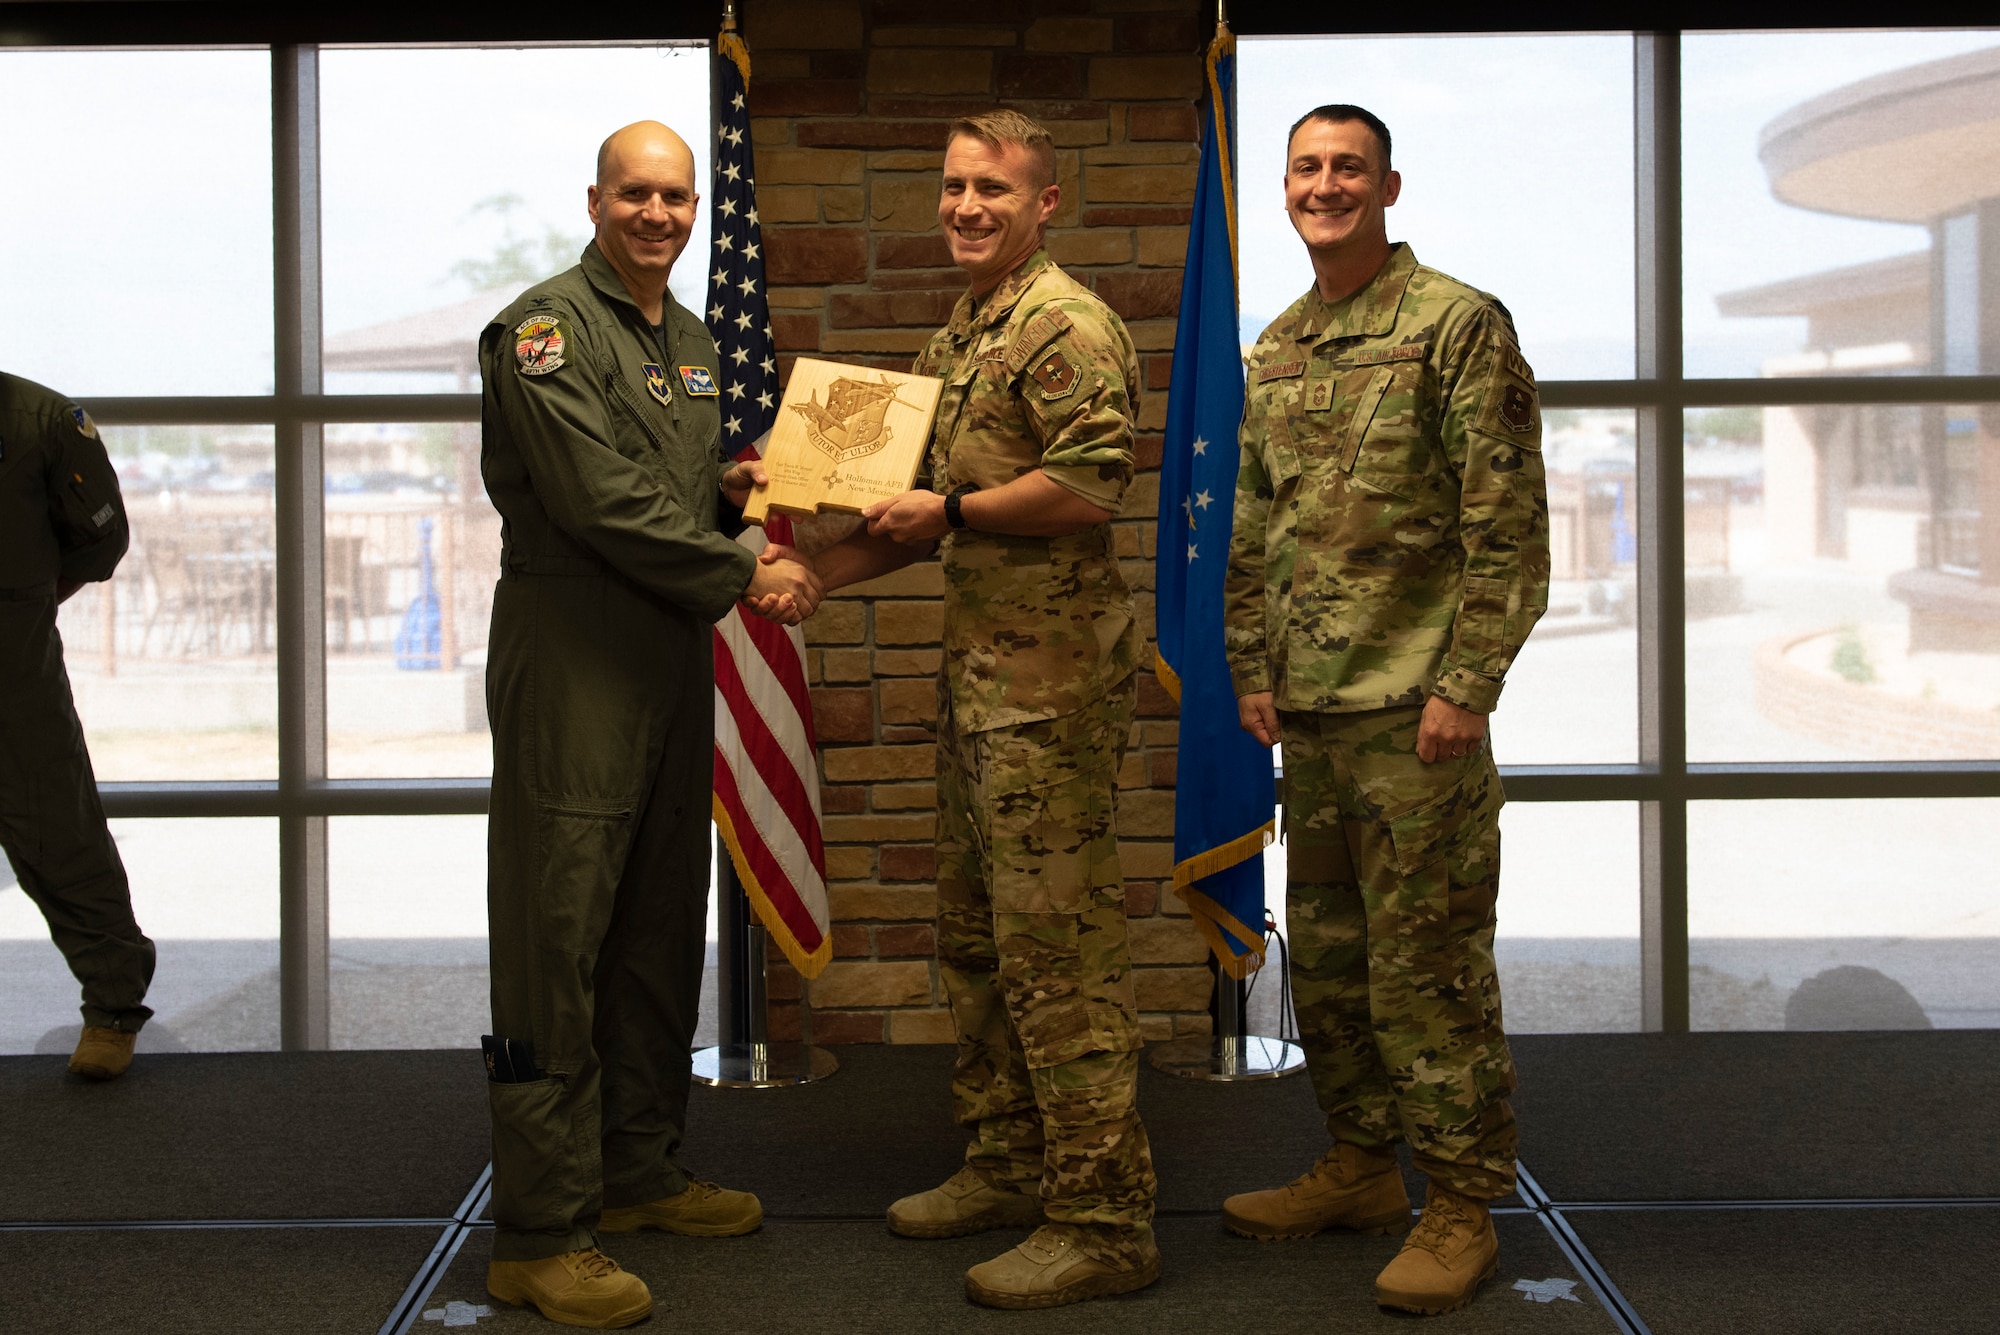 Capt. Travis Morgan, from the 9th Attack Squadron, accepts the Company Grade Officer of the Quarter Award during the 49th Wing’s 1st quarter awards ceremony, June 10, 2022, on Holloman Air Force Base, New Mexico.